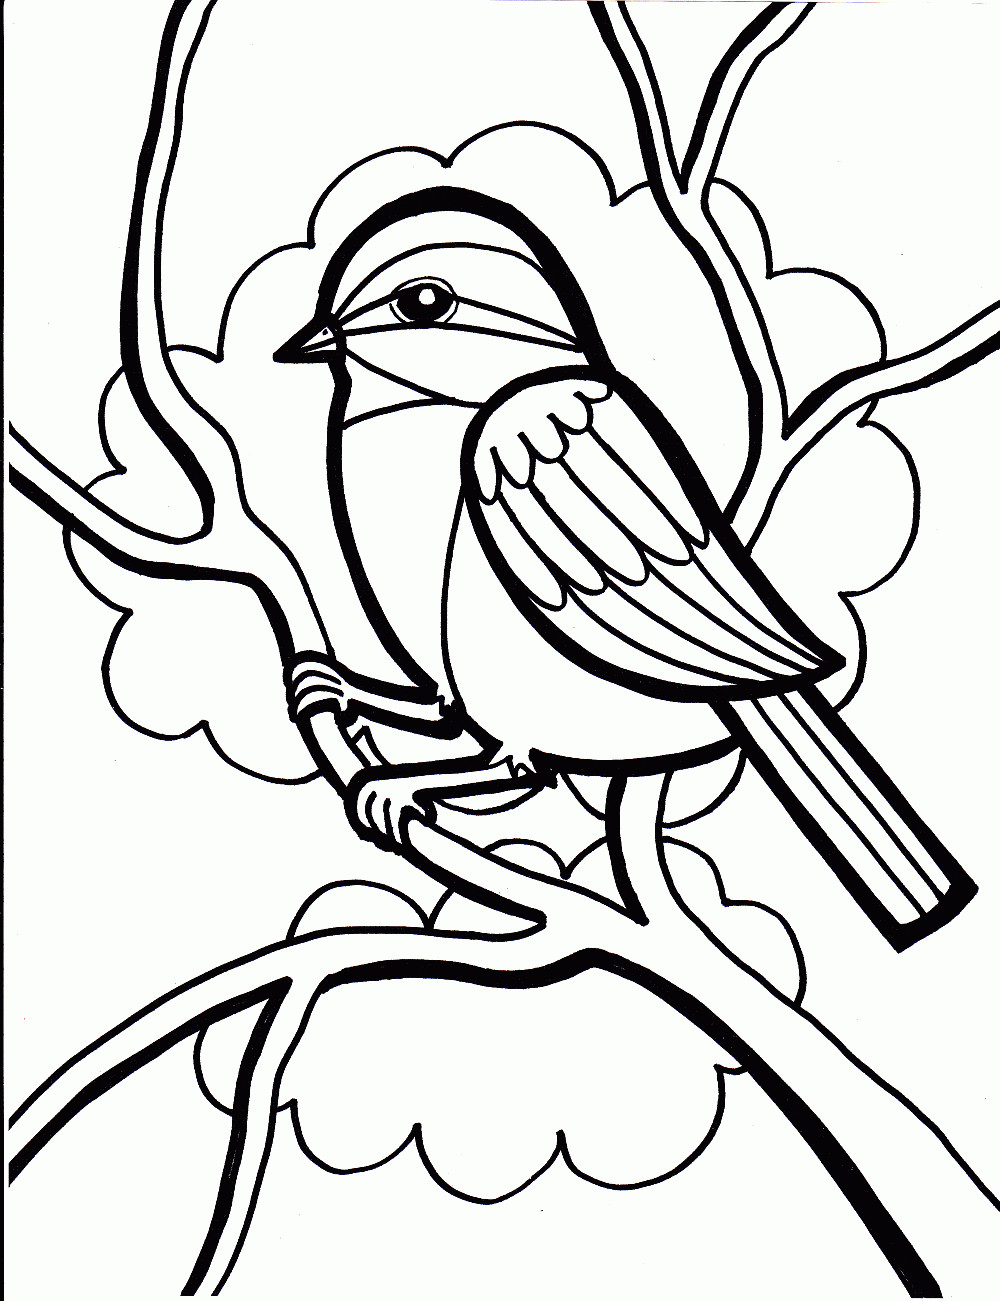 Kids Coloring Pages Free
 Coloring Now Blog Archive Free Coloring Pages for Kids